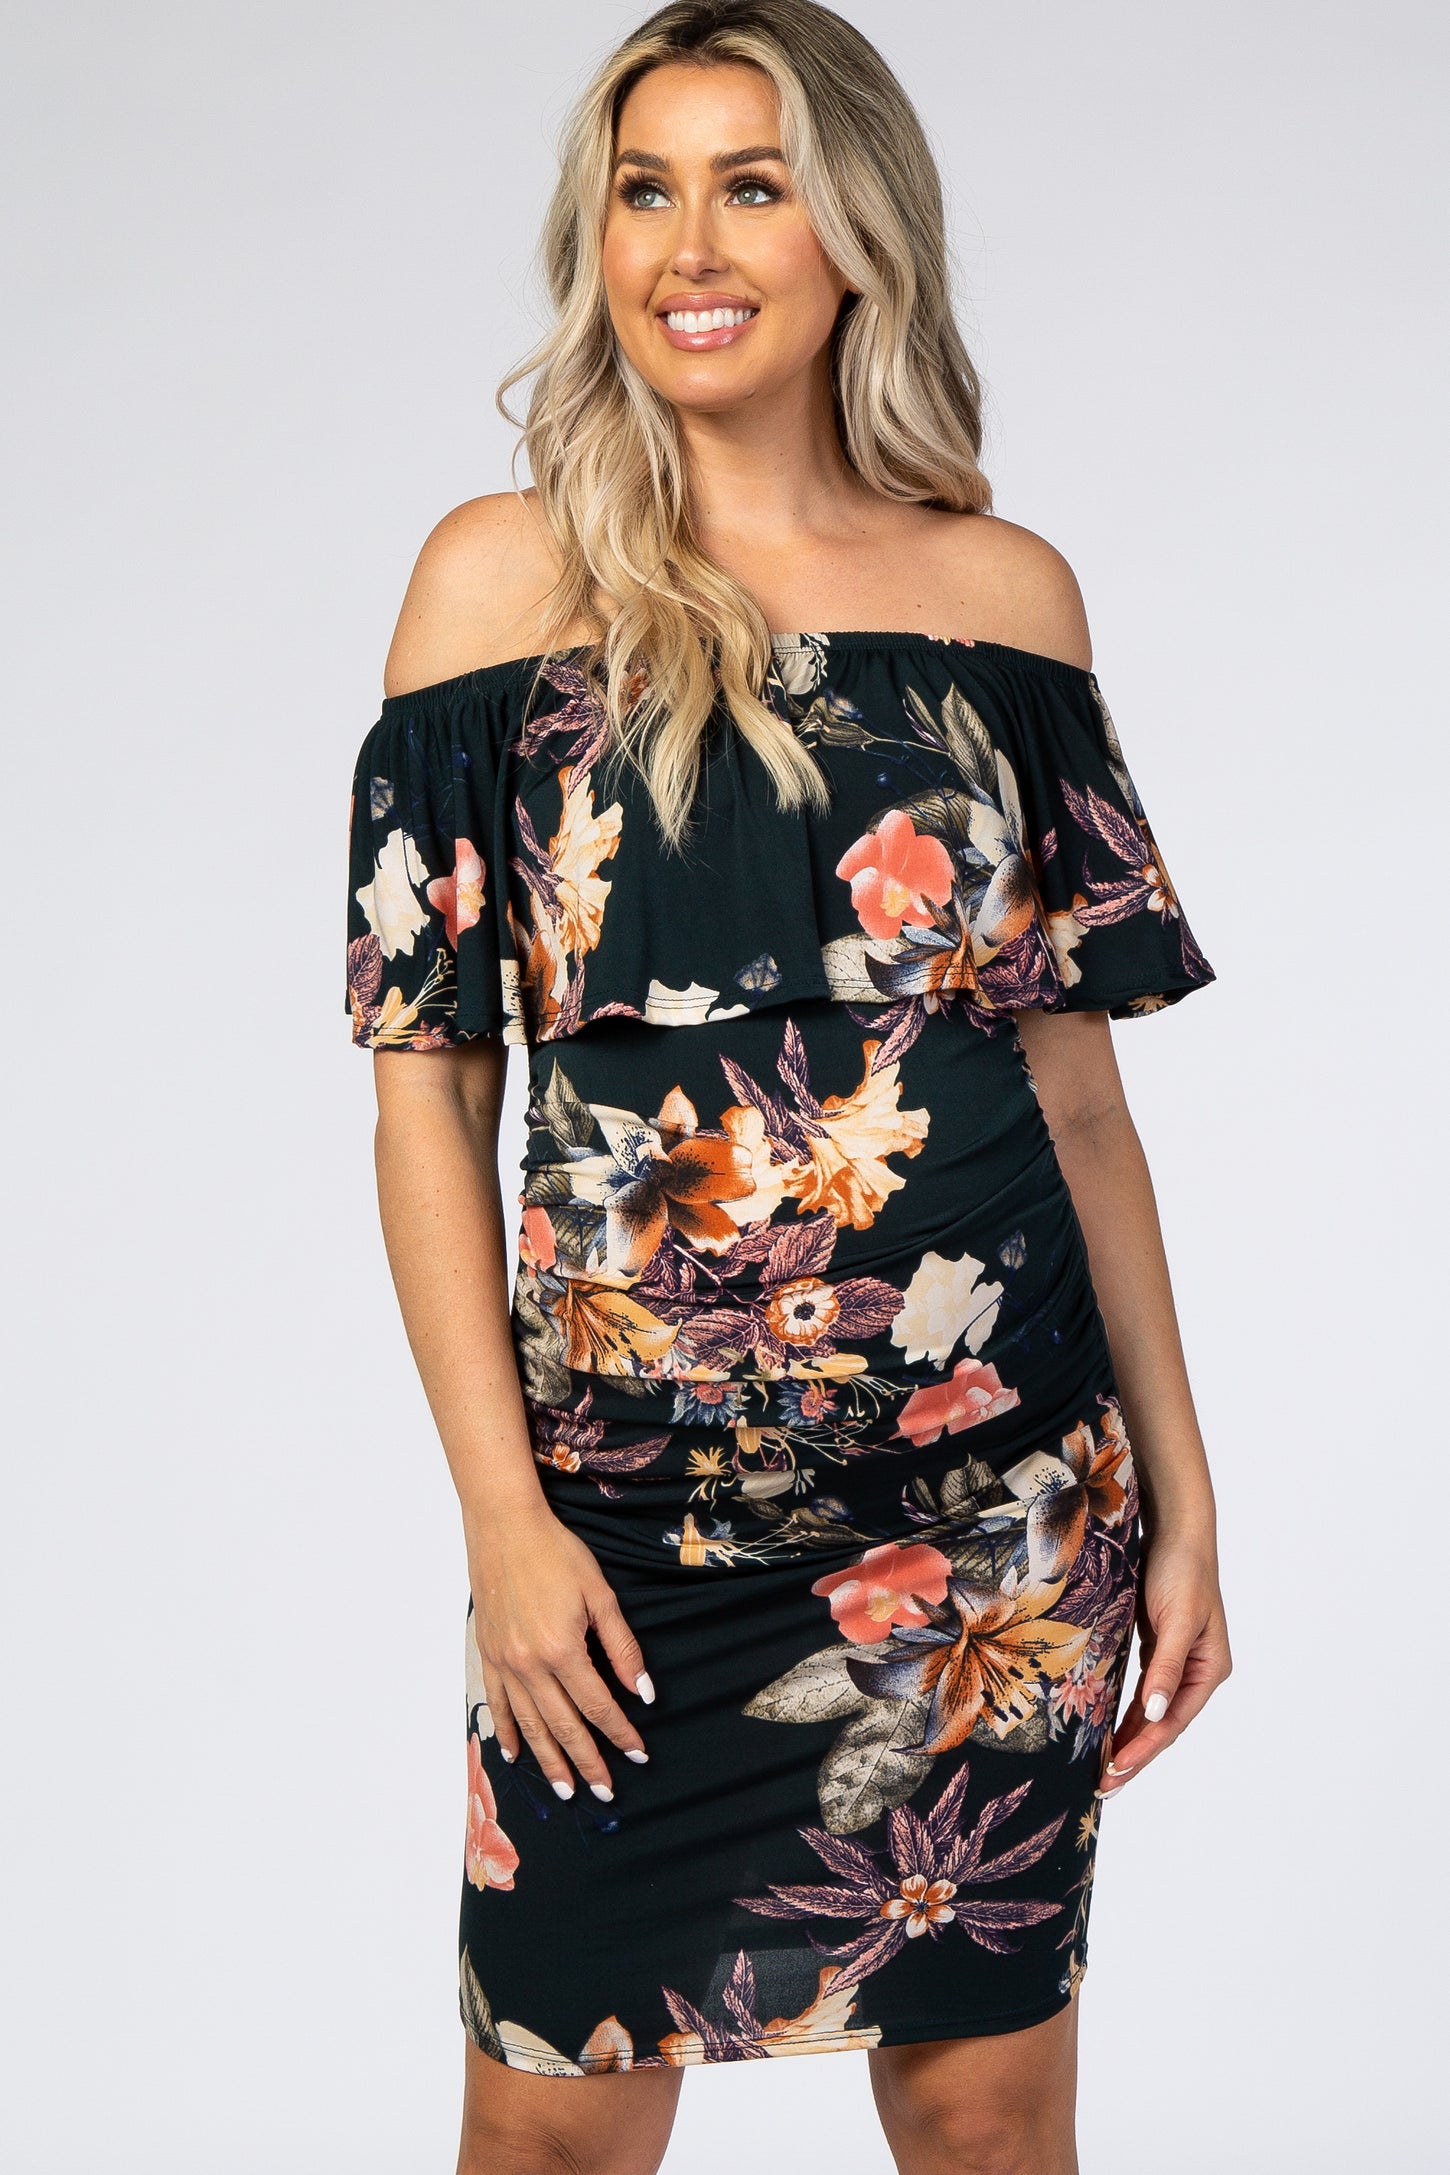 Dark Teal Floral Ruffle Off Shoulder Fitted Maternity Dress– PinkBlush